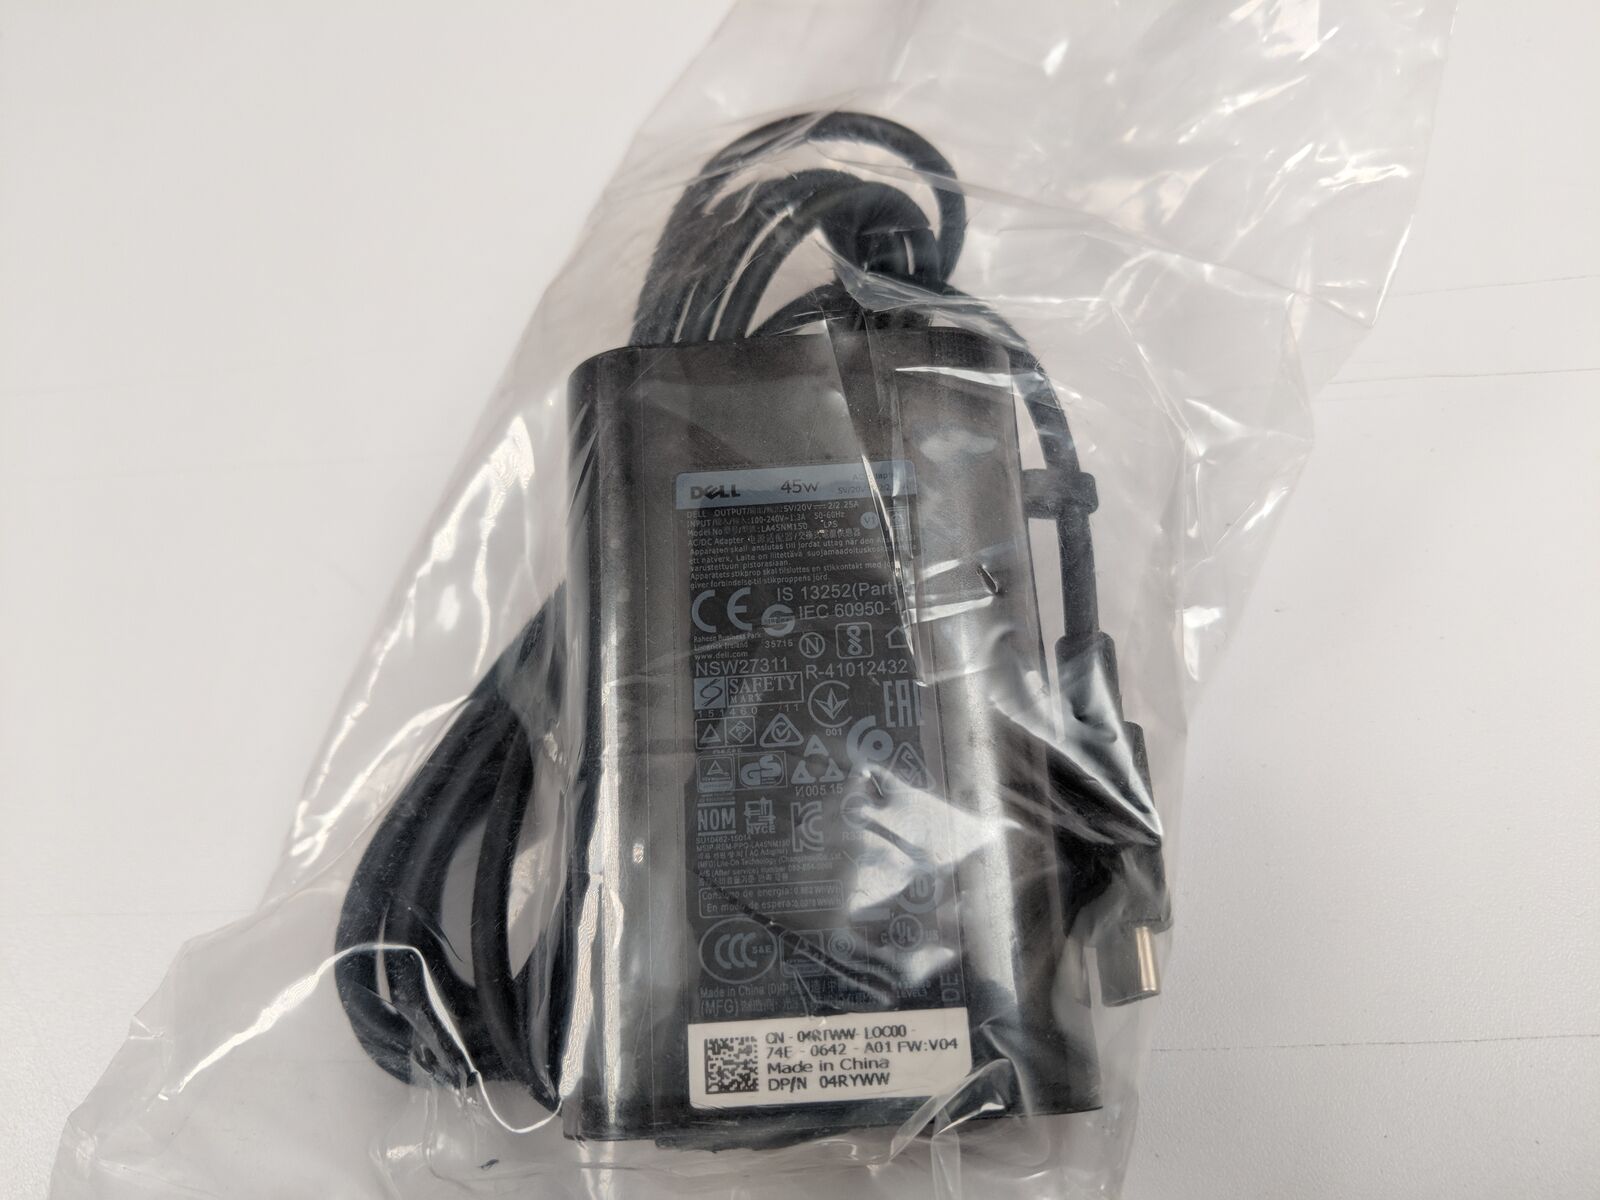 Dell 45W AC Adapter Charger USB-C Type C XPS 13 9365 9370 9380 9300 9310 MPN: LA45NM150 689C4 HDCY5 8XTW5 Brand: Dell - Click Image to Close